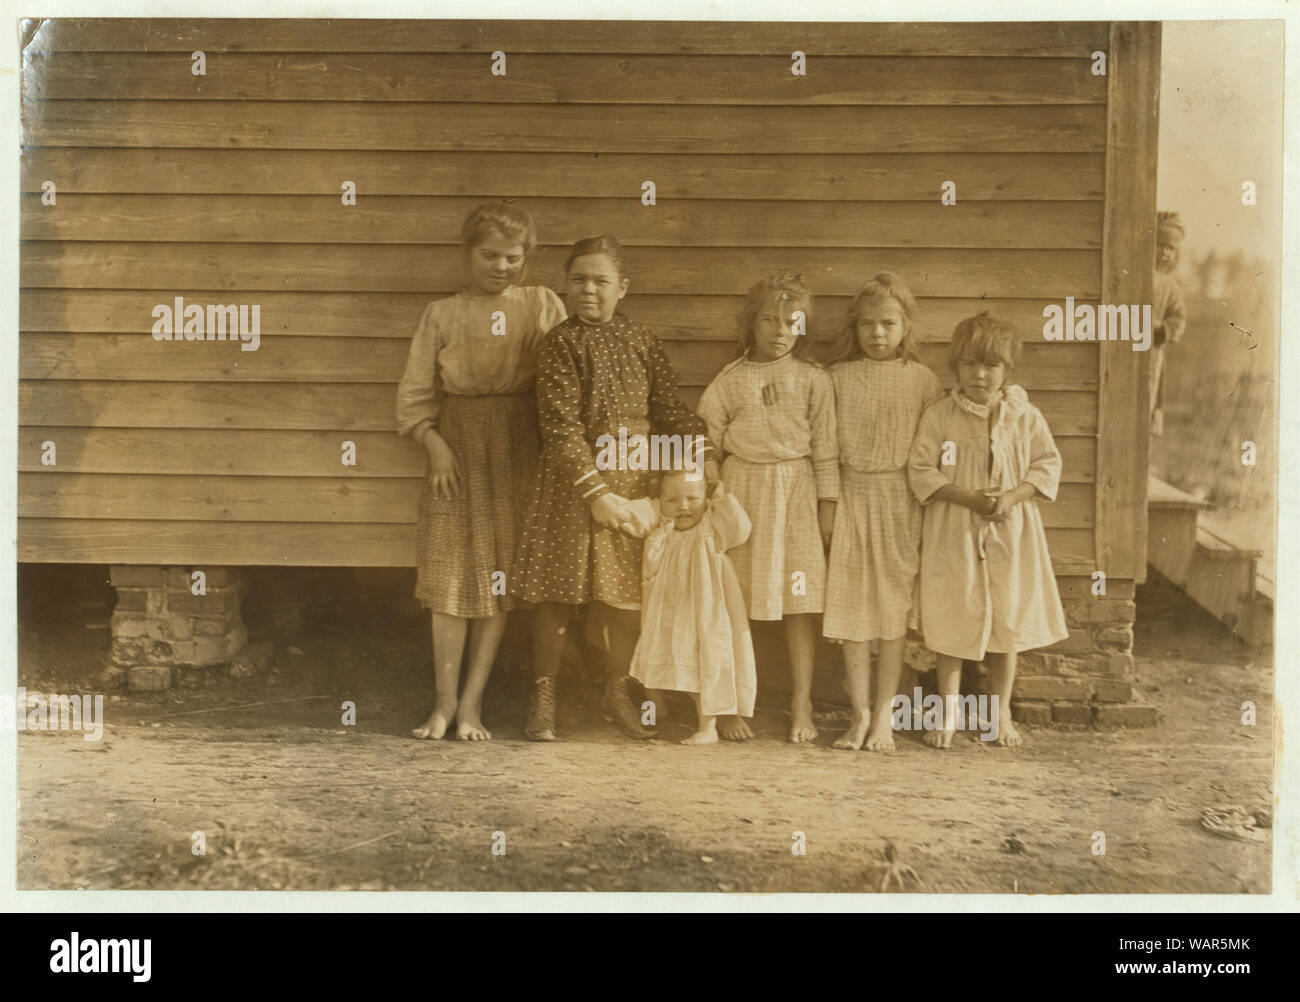 Dillon Mill (tallest) Lizzie McKenzie, Has helped 1/2 year. Mamie Baxley (holding baby). Been in mill 3 years. Runs 4 sides = 40 cents a day. Maud & Daisy help. Abstract: Photographs from the records of the National Child Labor Committee (U.S.) Stock Photo